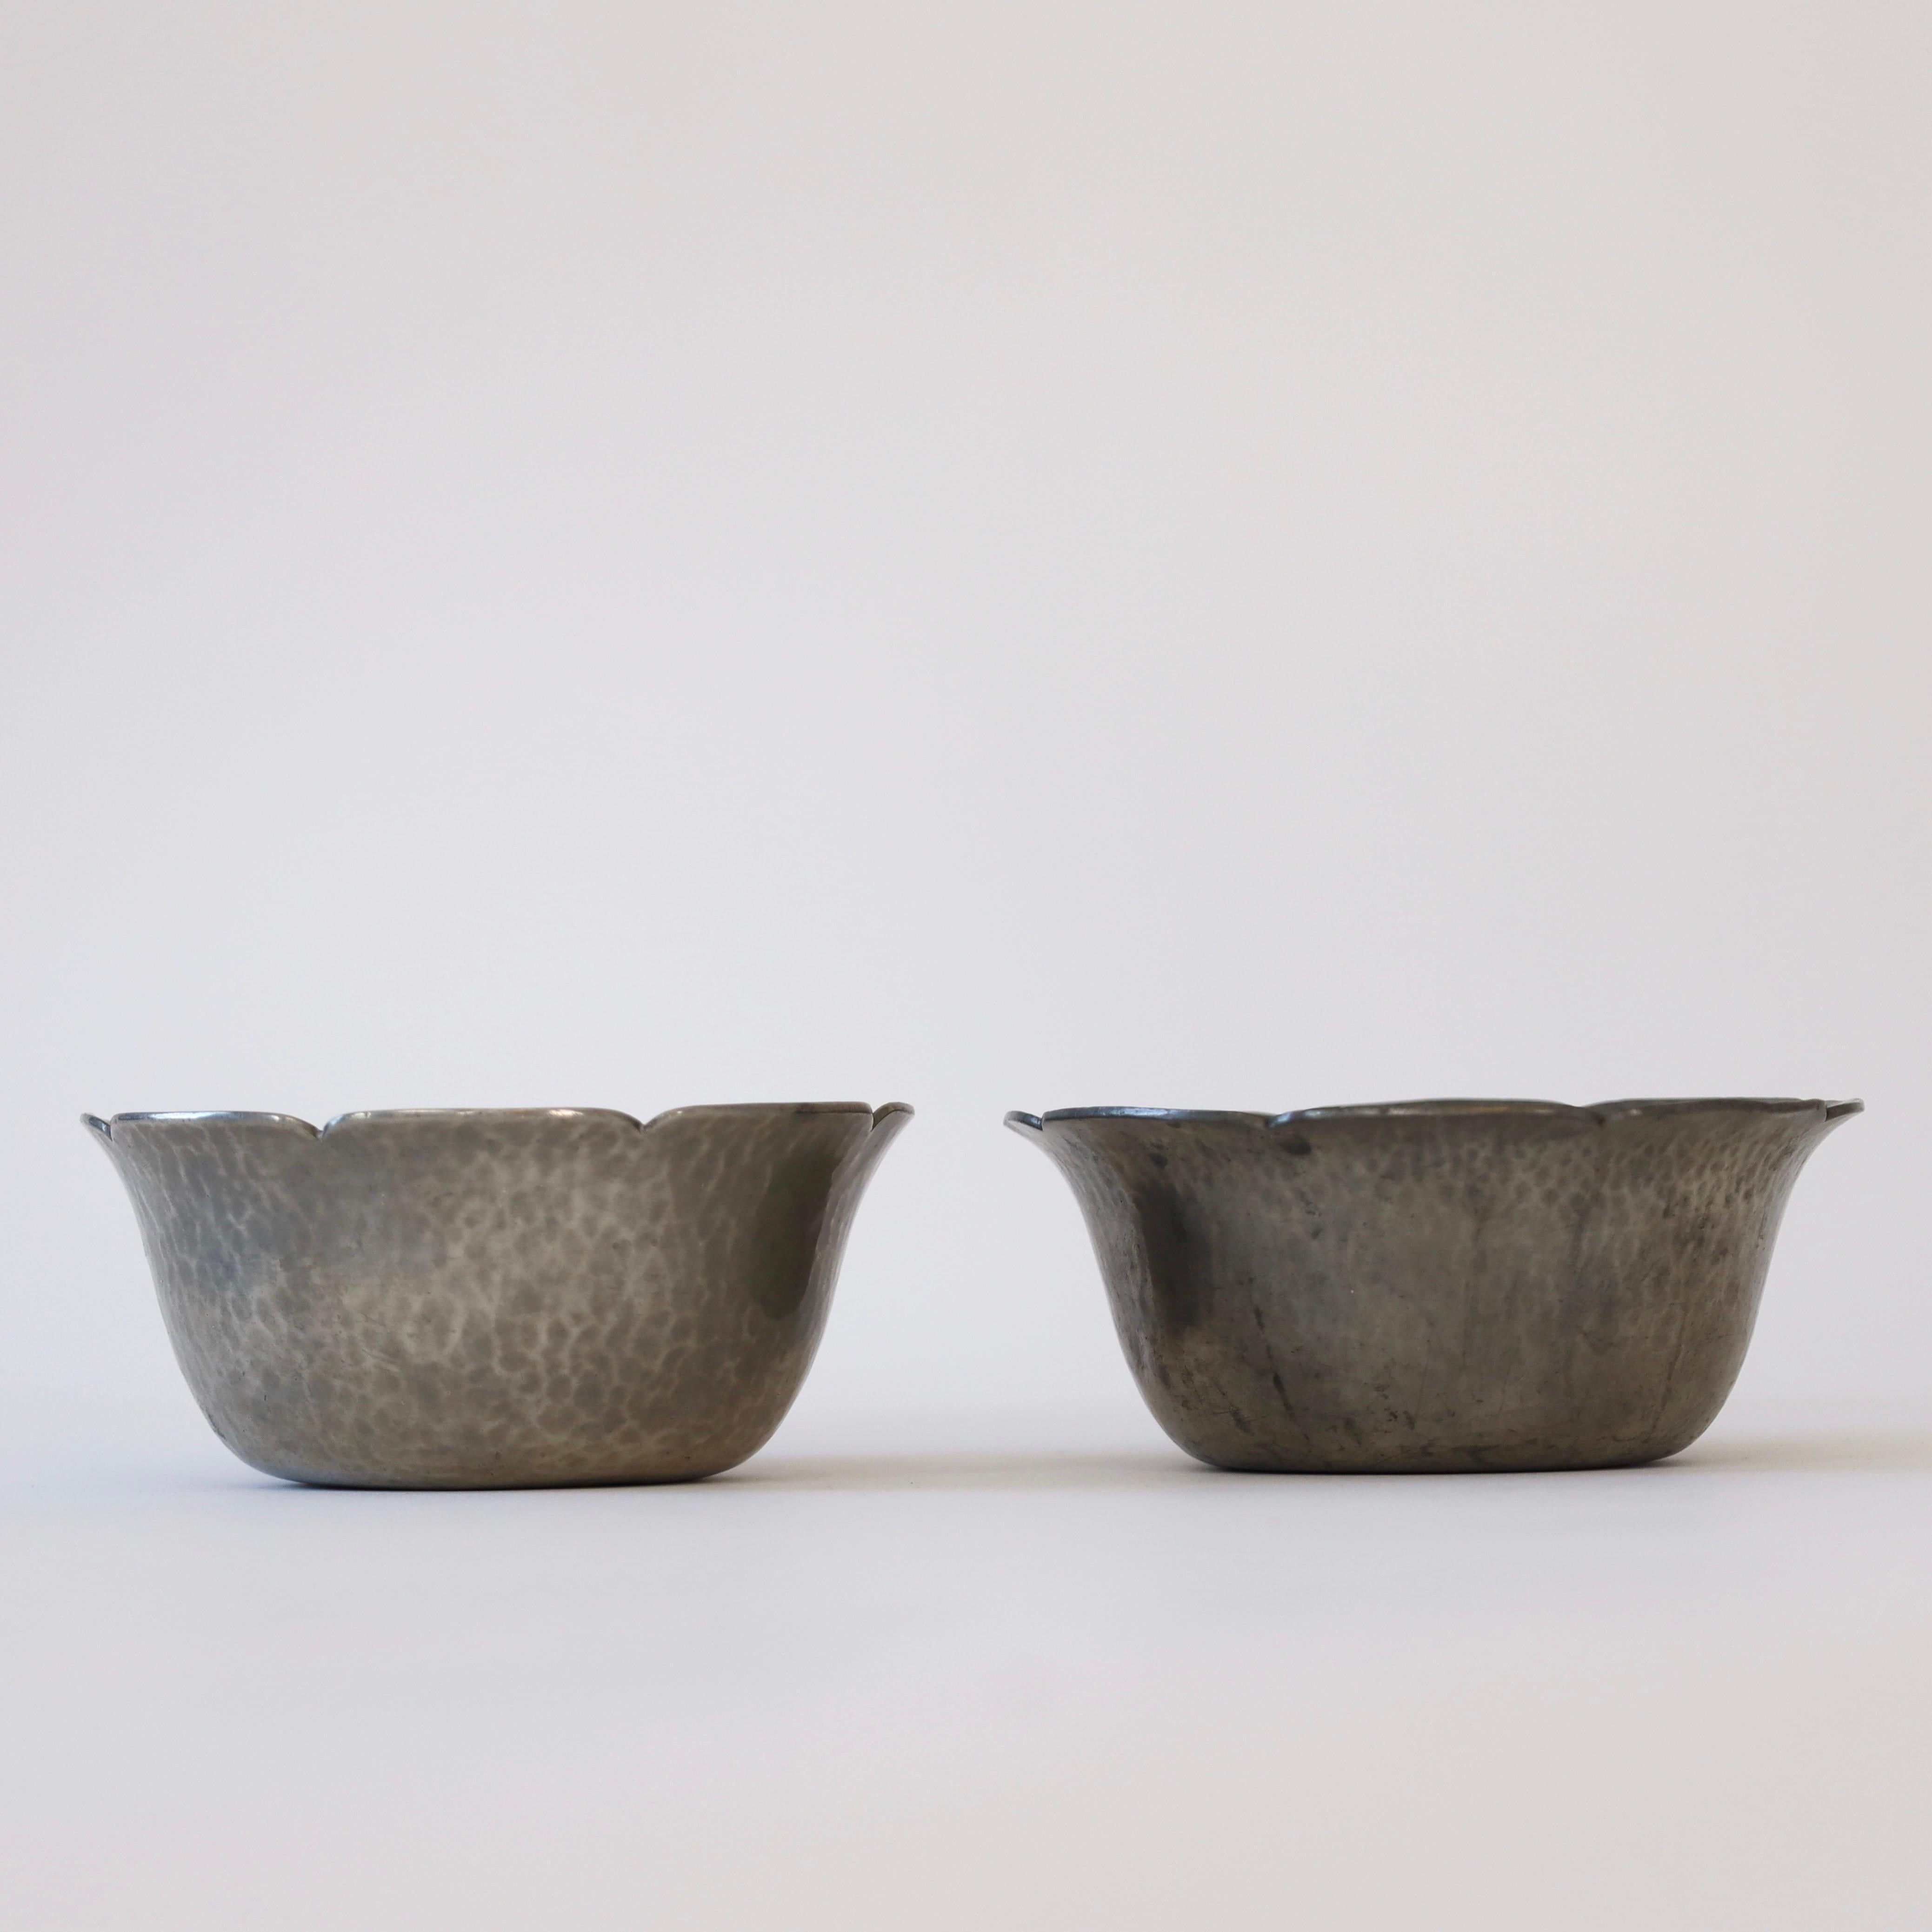 Hammered Set of hammered pewter bowls by Just Andersen, 1920s, Denmark For Sale